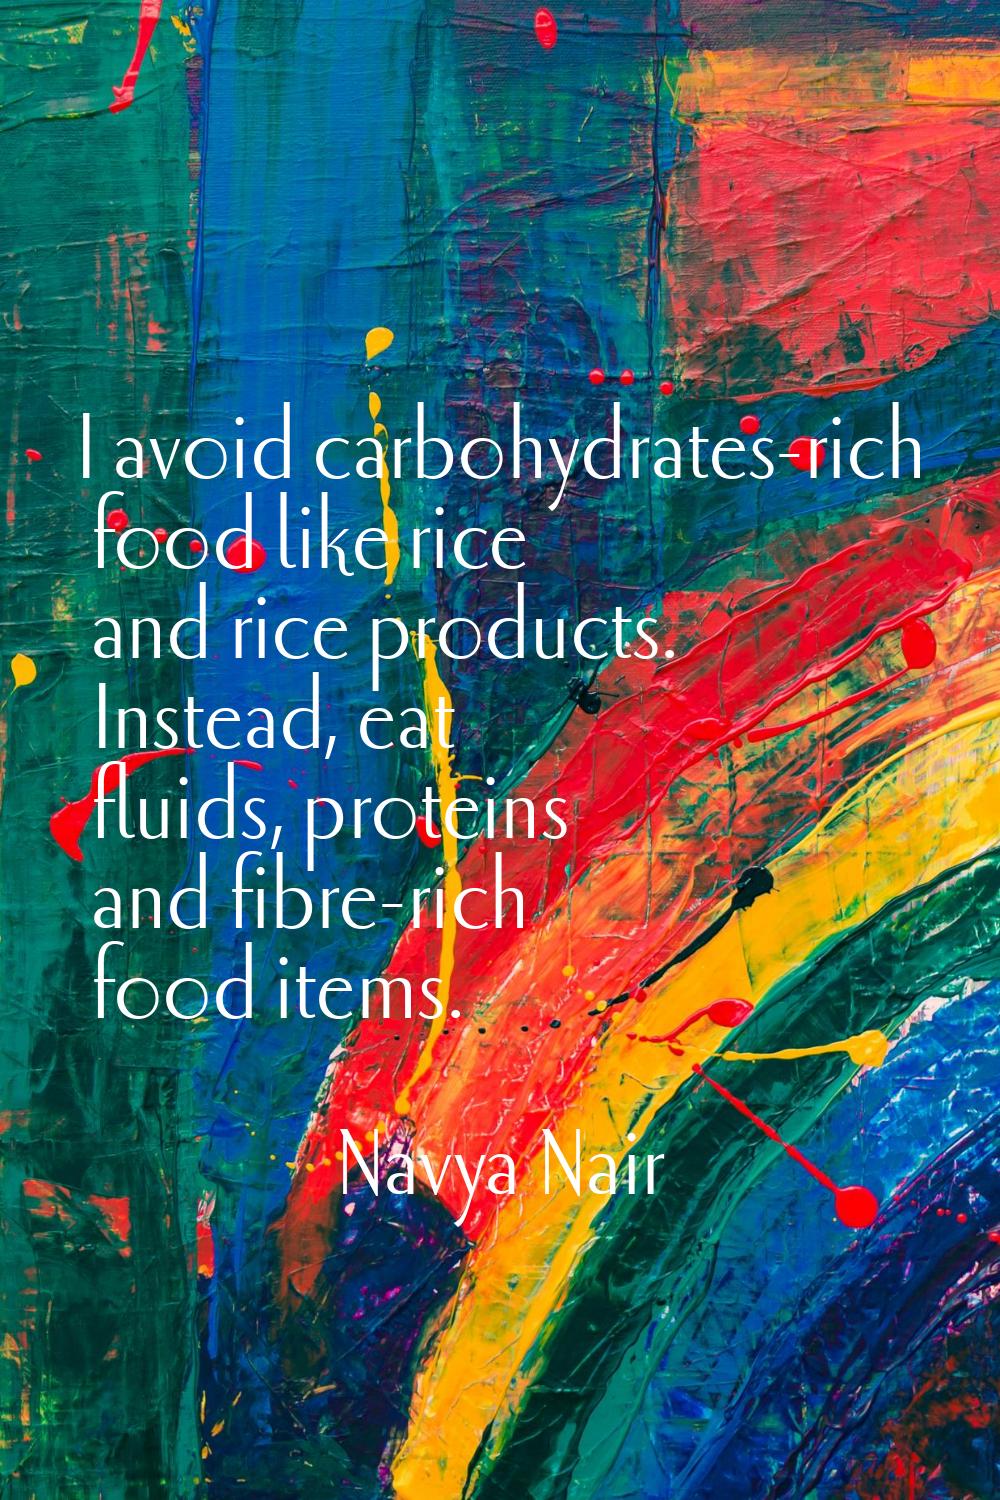 I avoid carbohydrates-rich food like rice and rice products. Instead, eat fluids, proteins and fibr